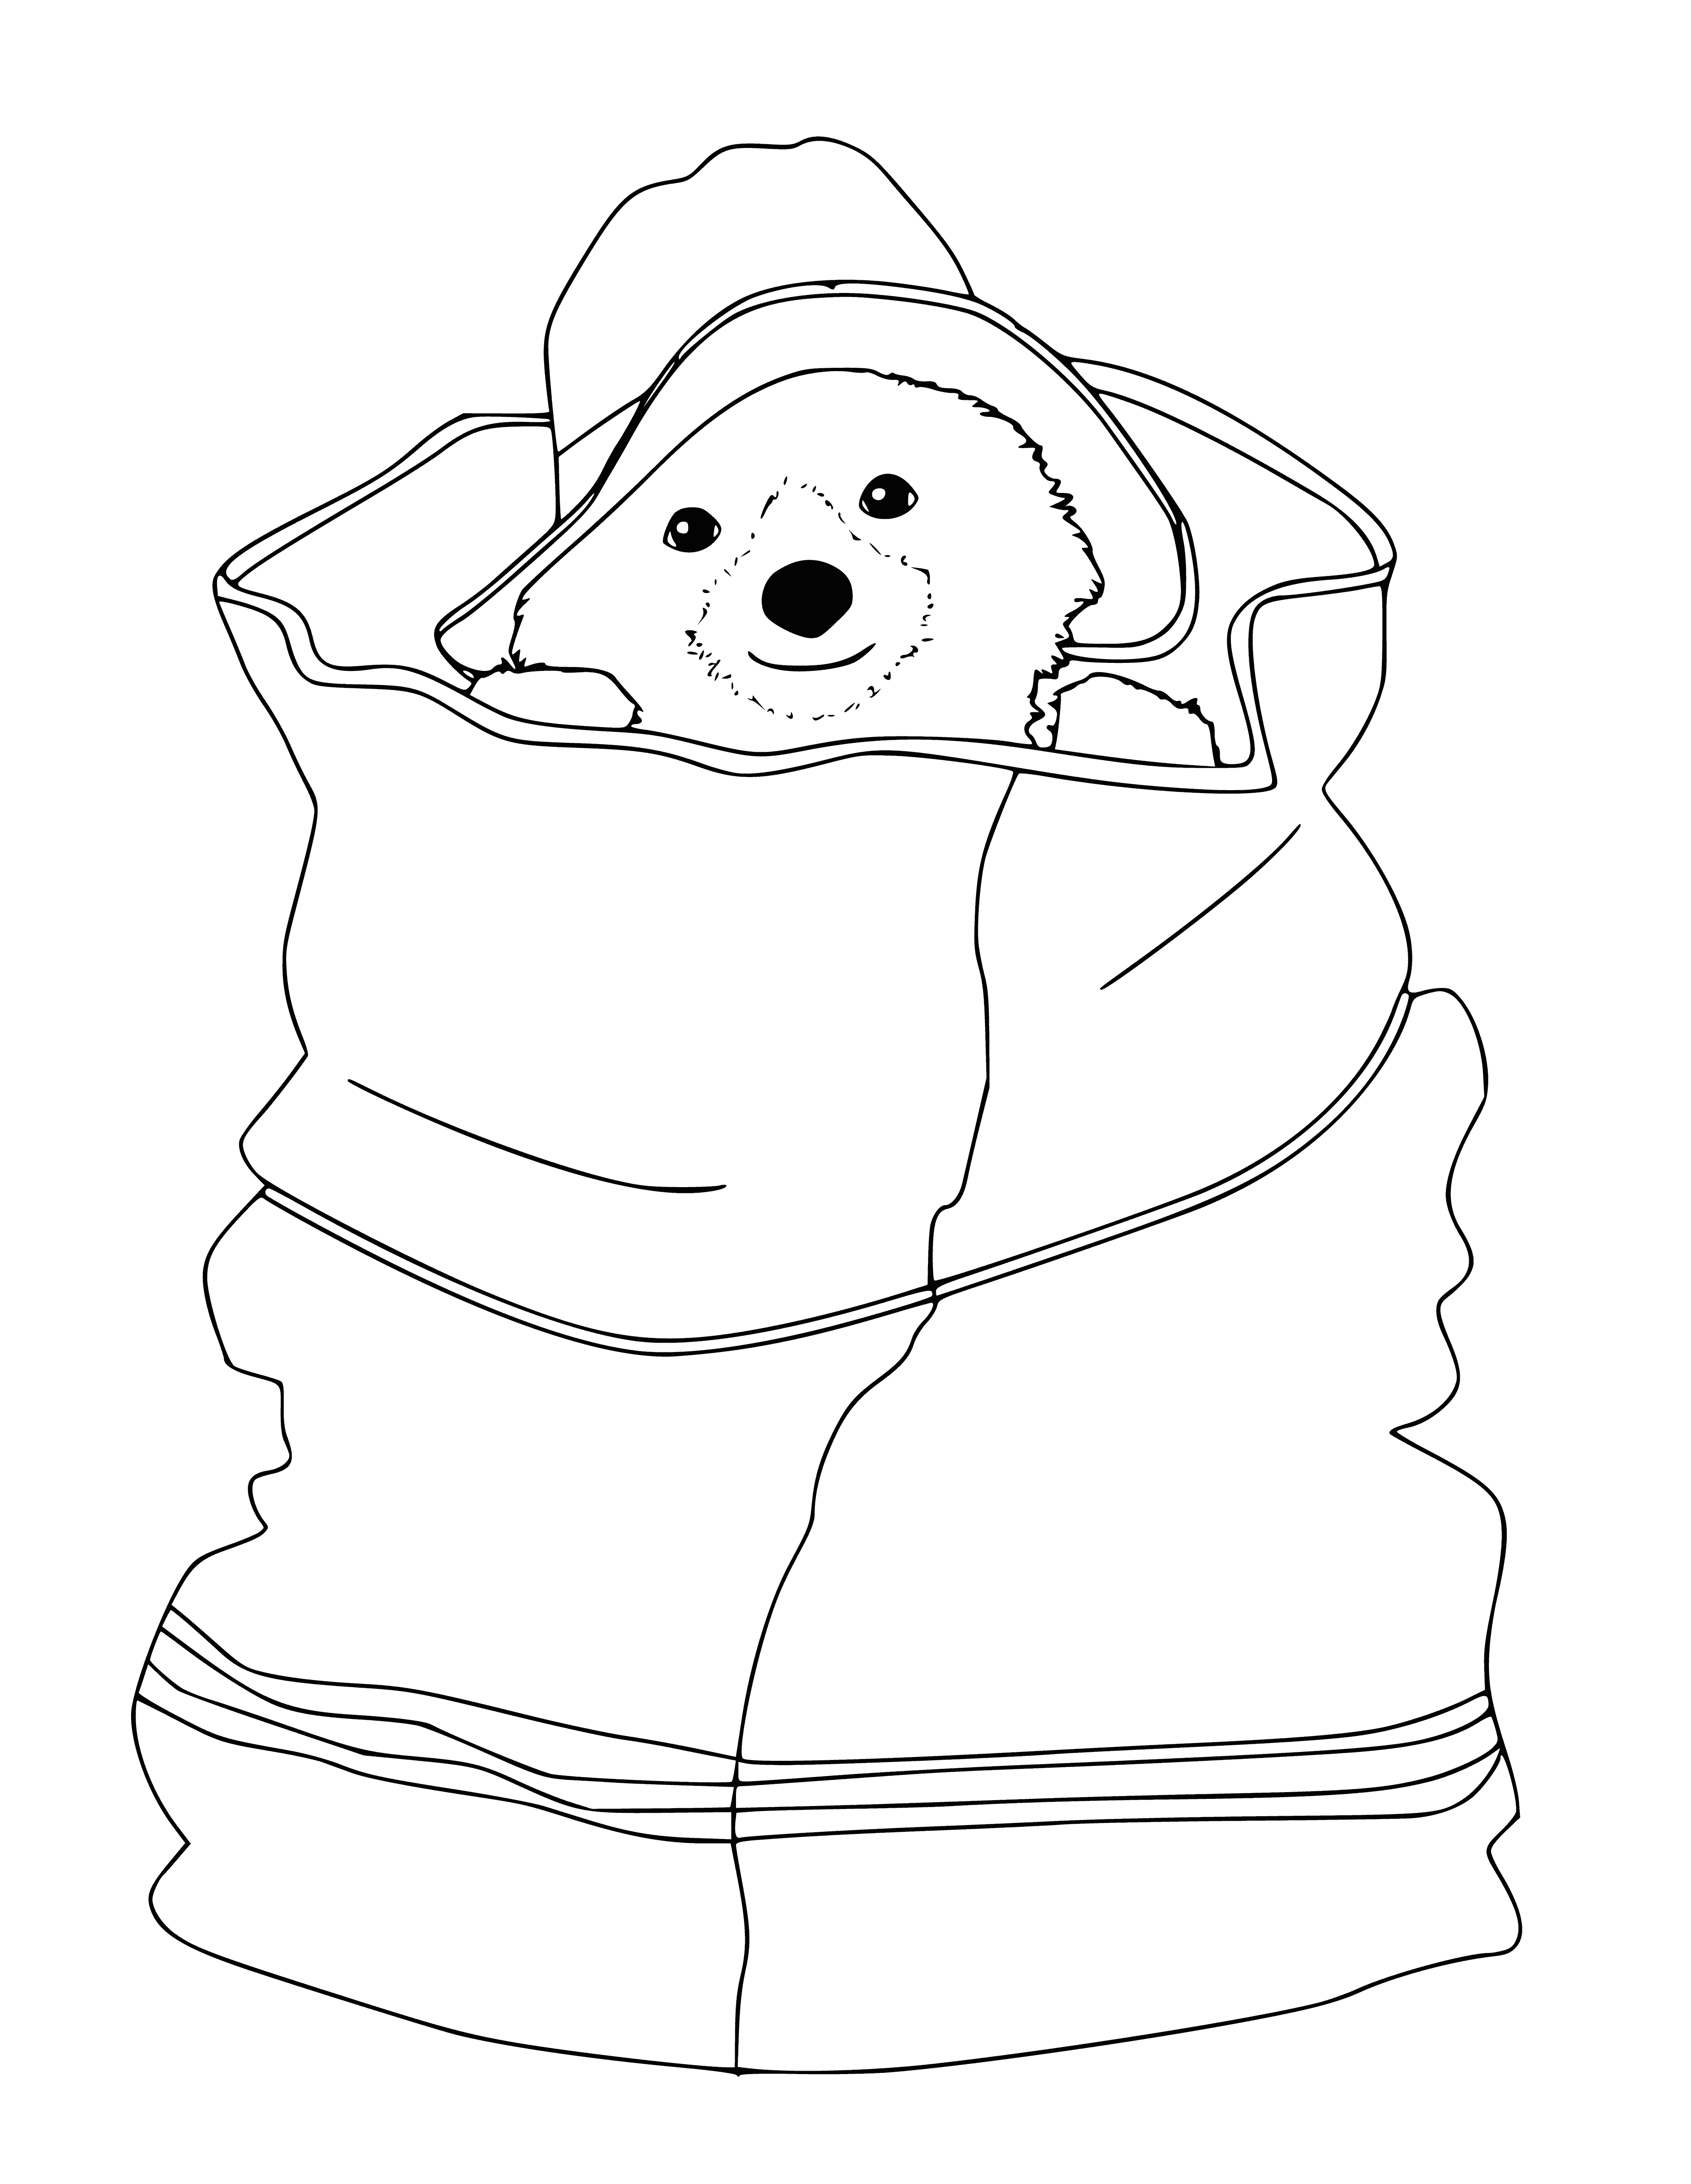 Teddy bear hid in a bag coloring page